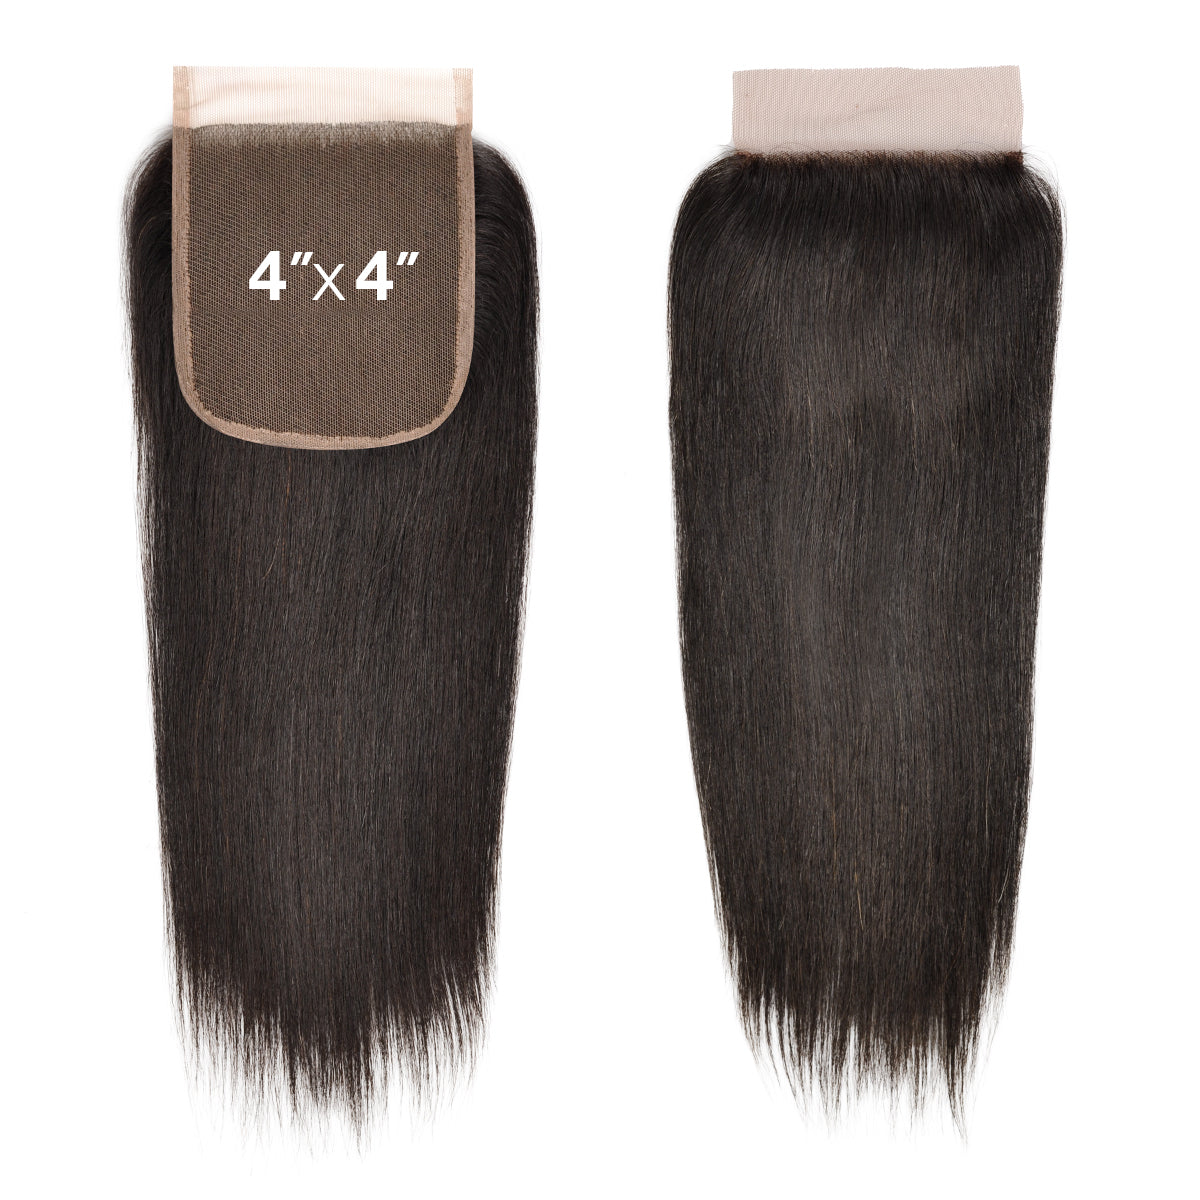 4x4, HD Lace, Closure, Free Part, Wide Lace, Straight